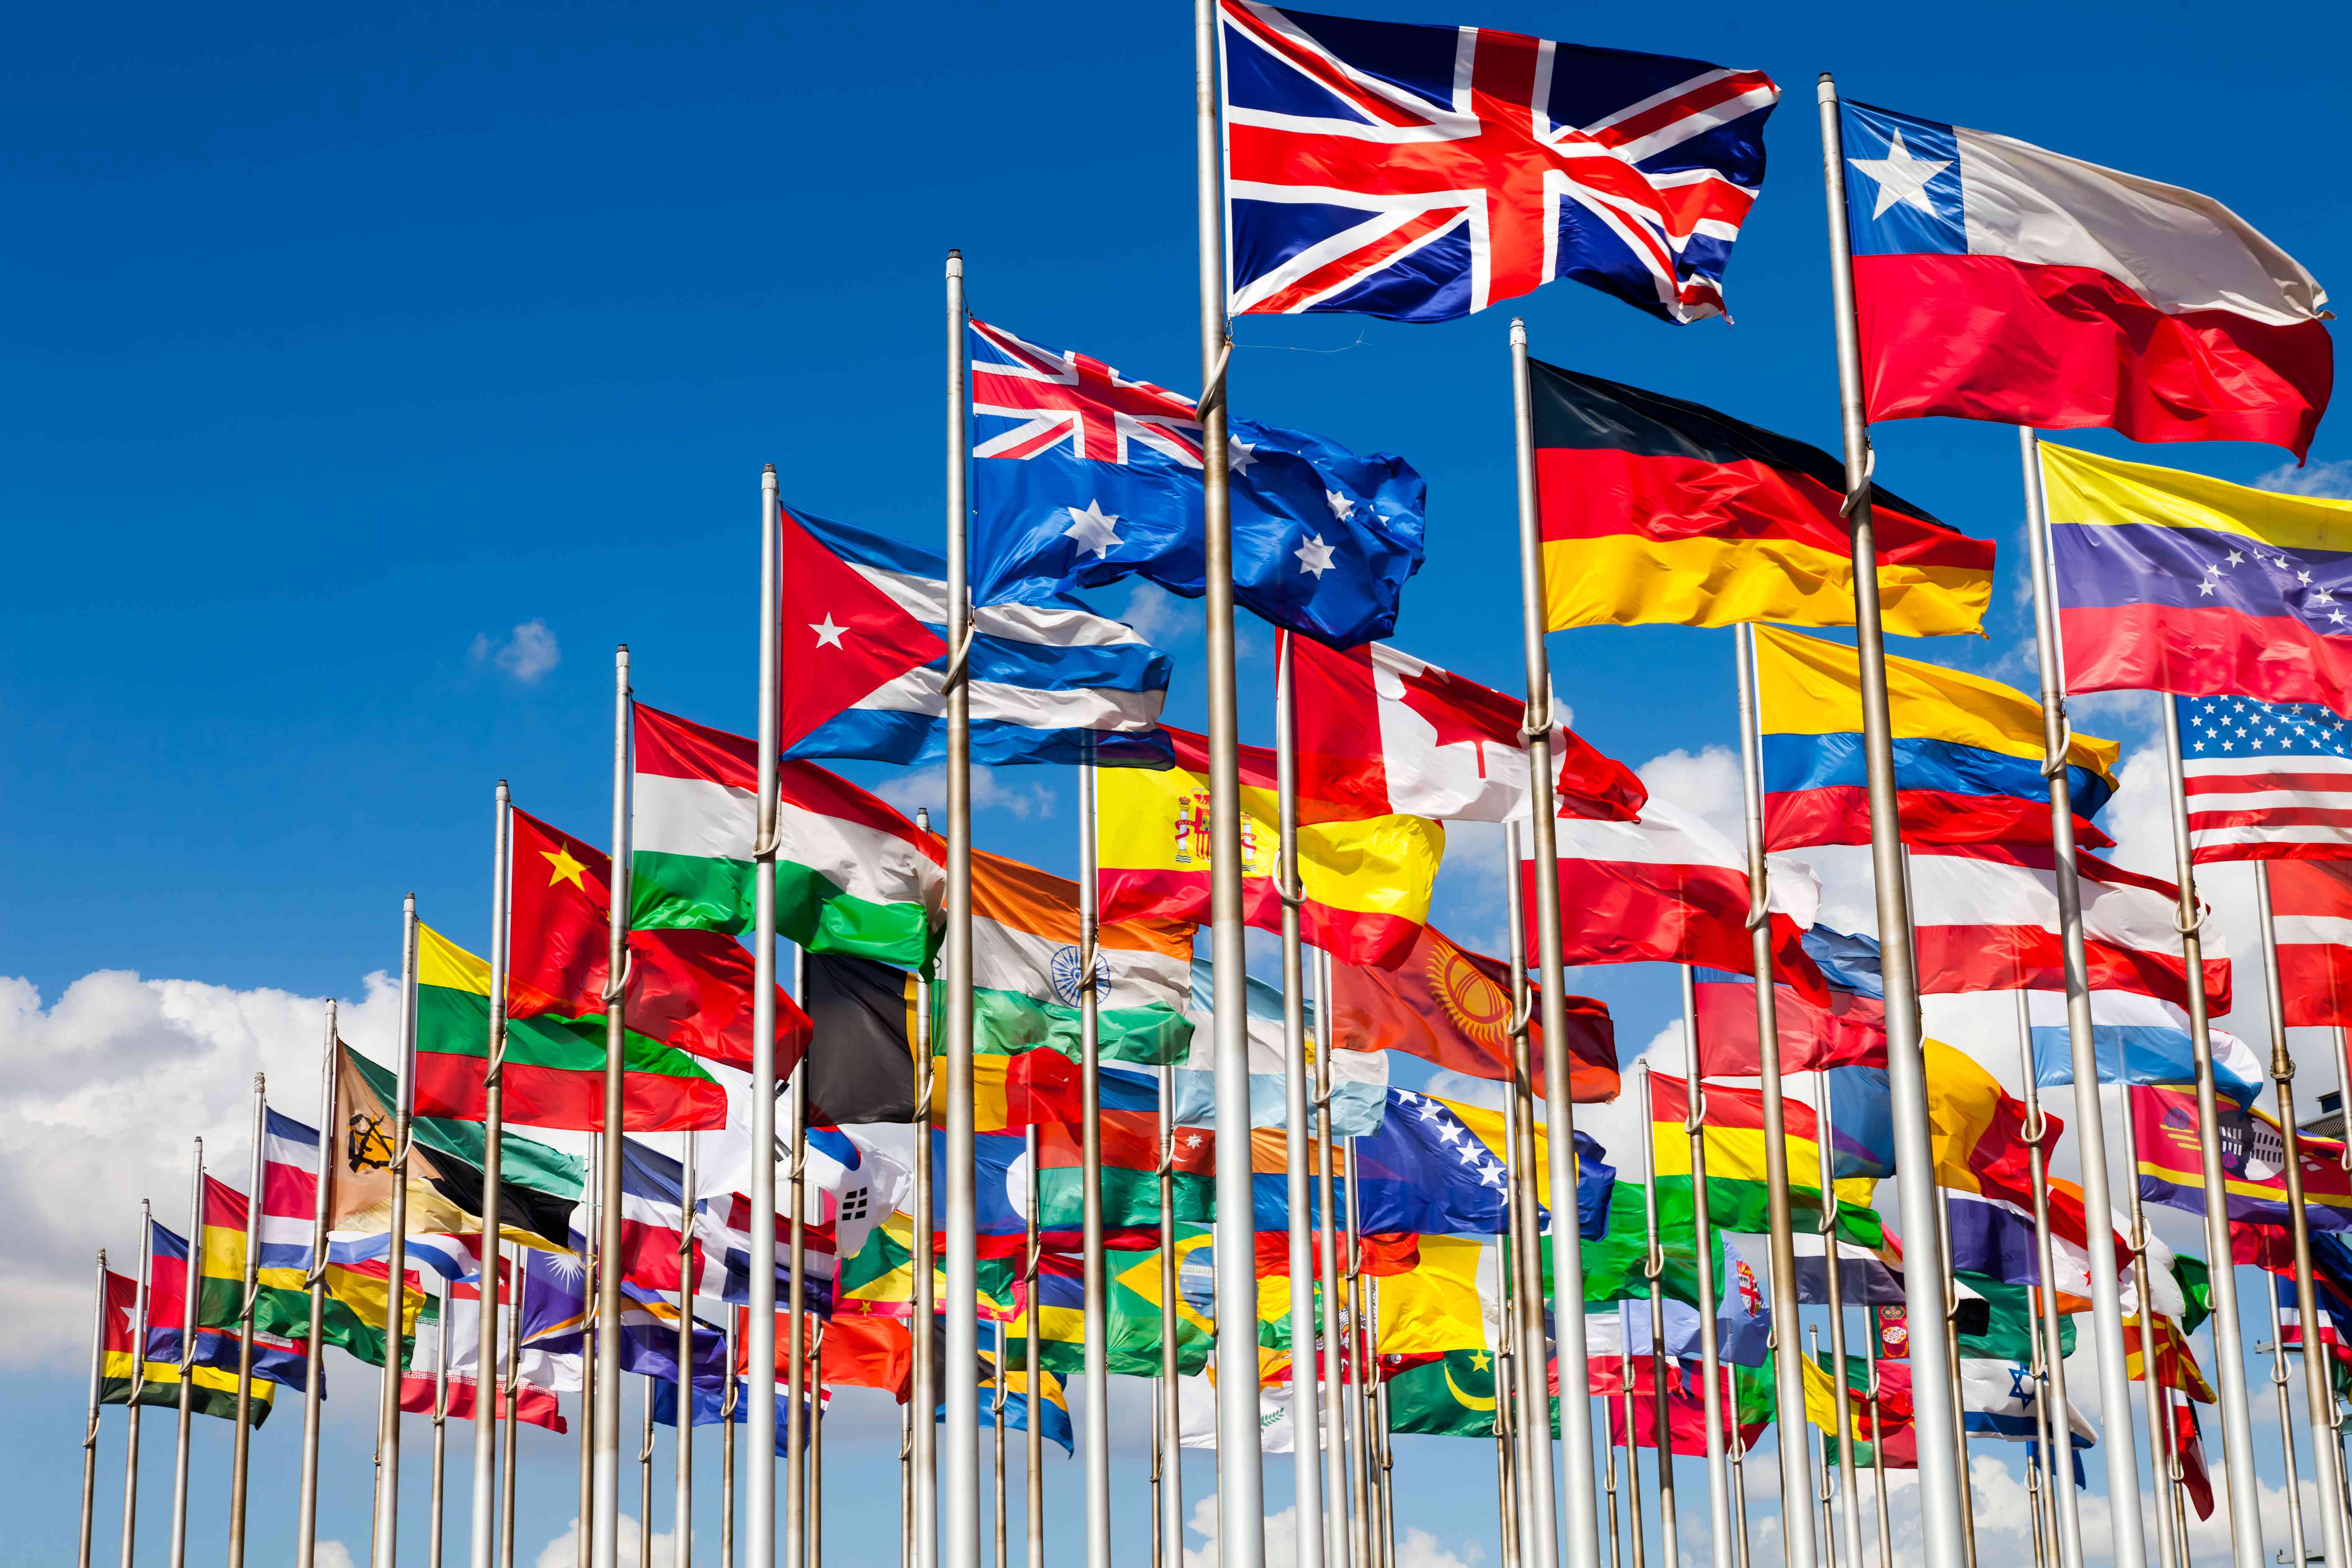 International flags flying outdoors